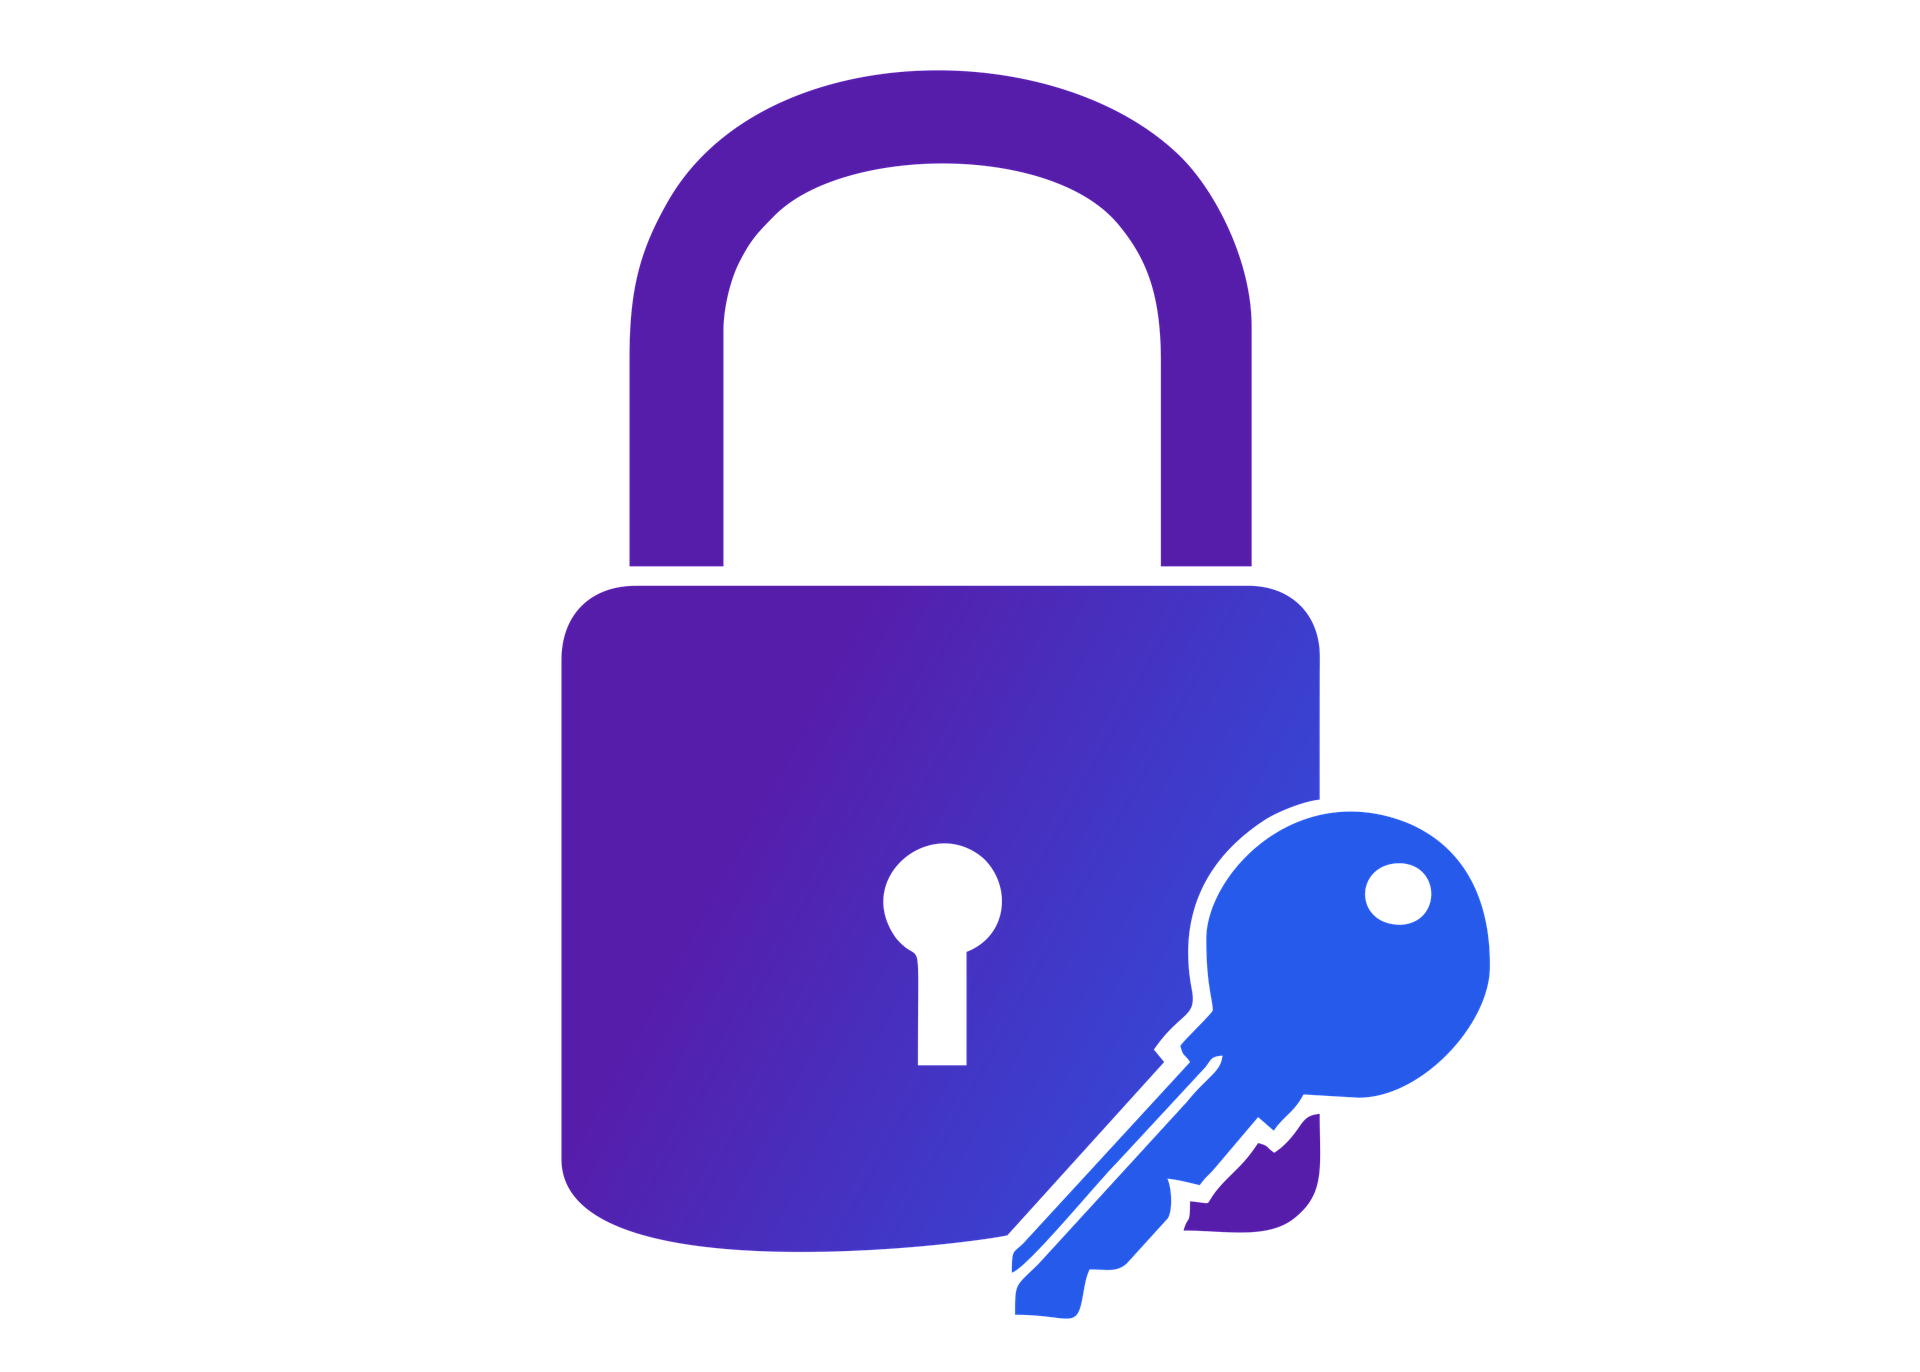 lock and key icon